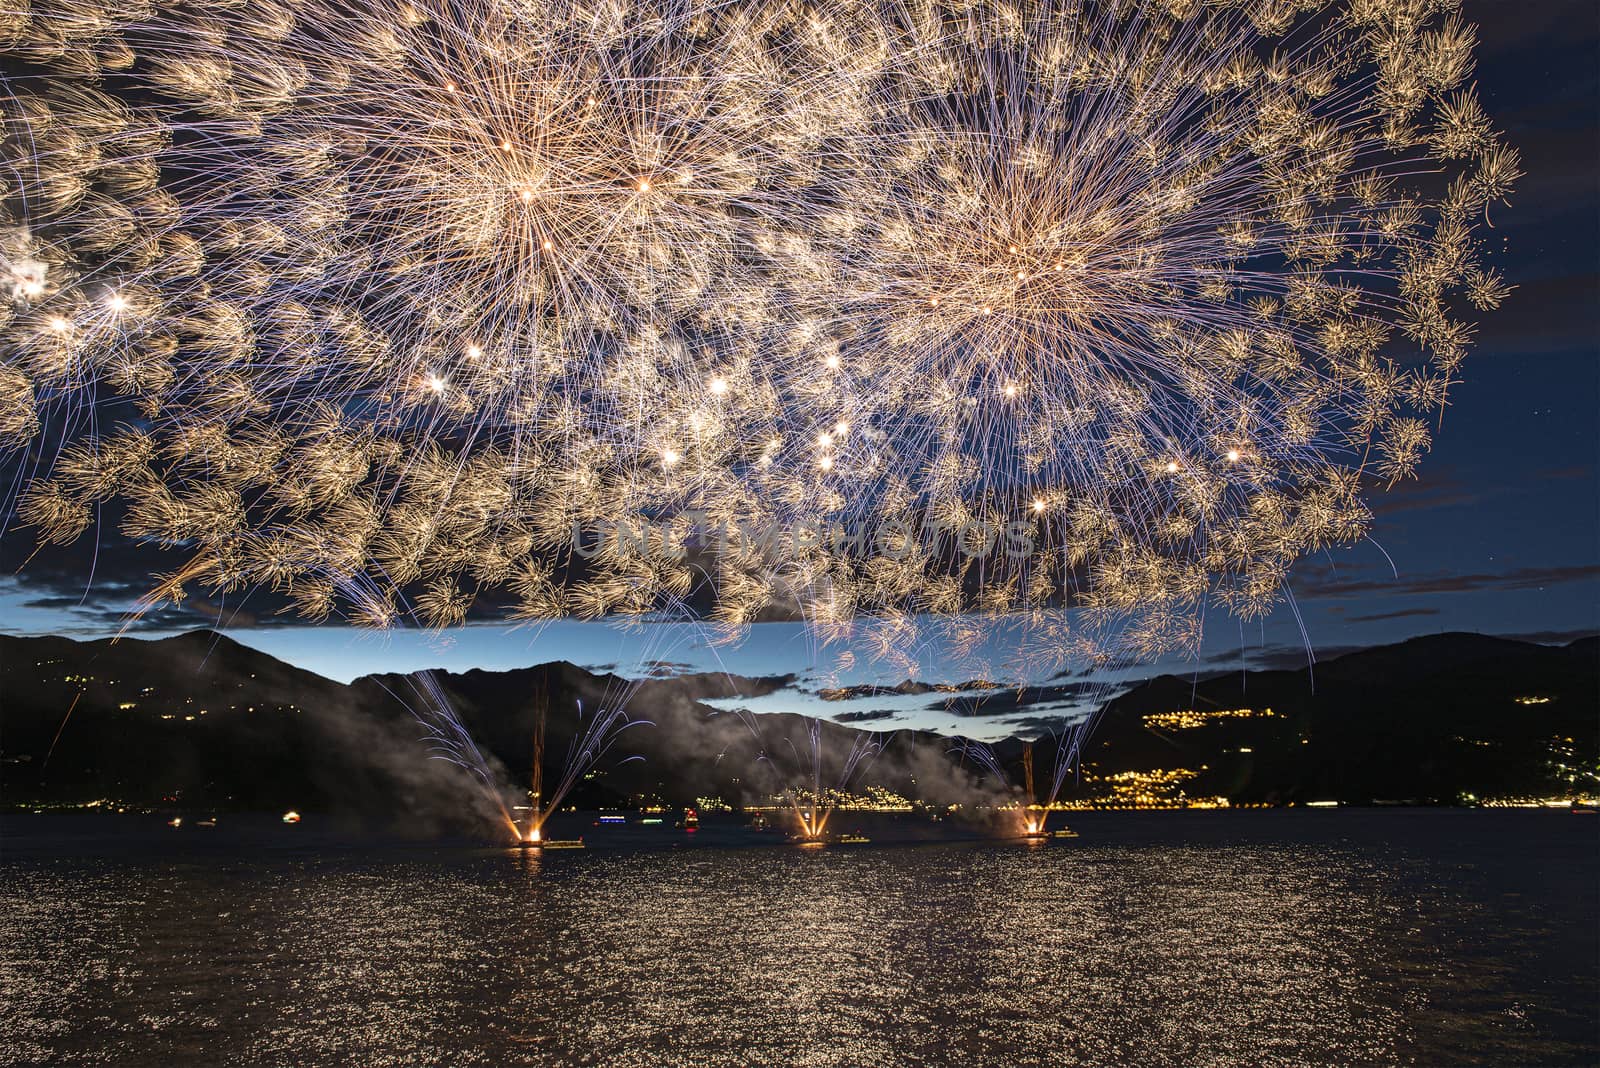 Lakefront Luino, fireworks on the Maggiore lake, Lombardy - Italy